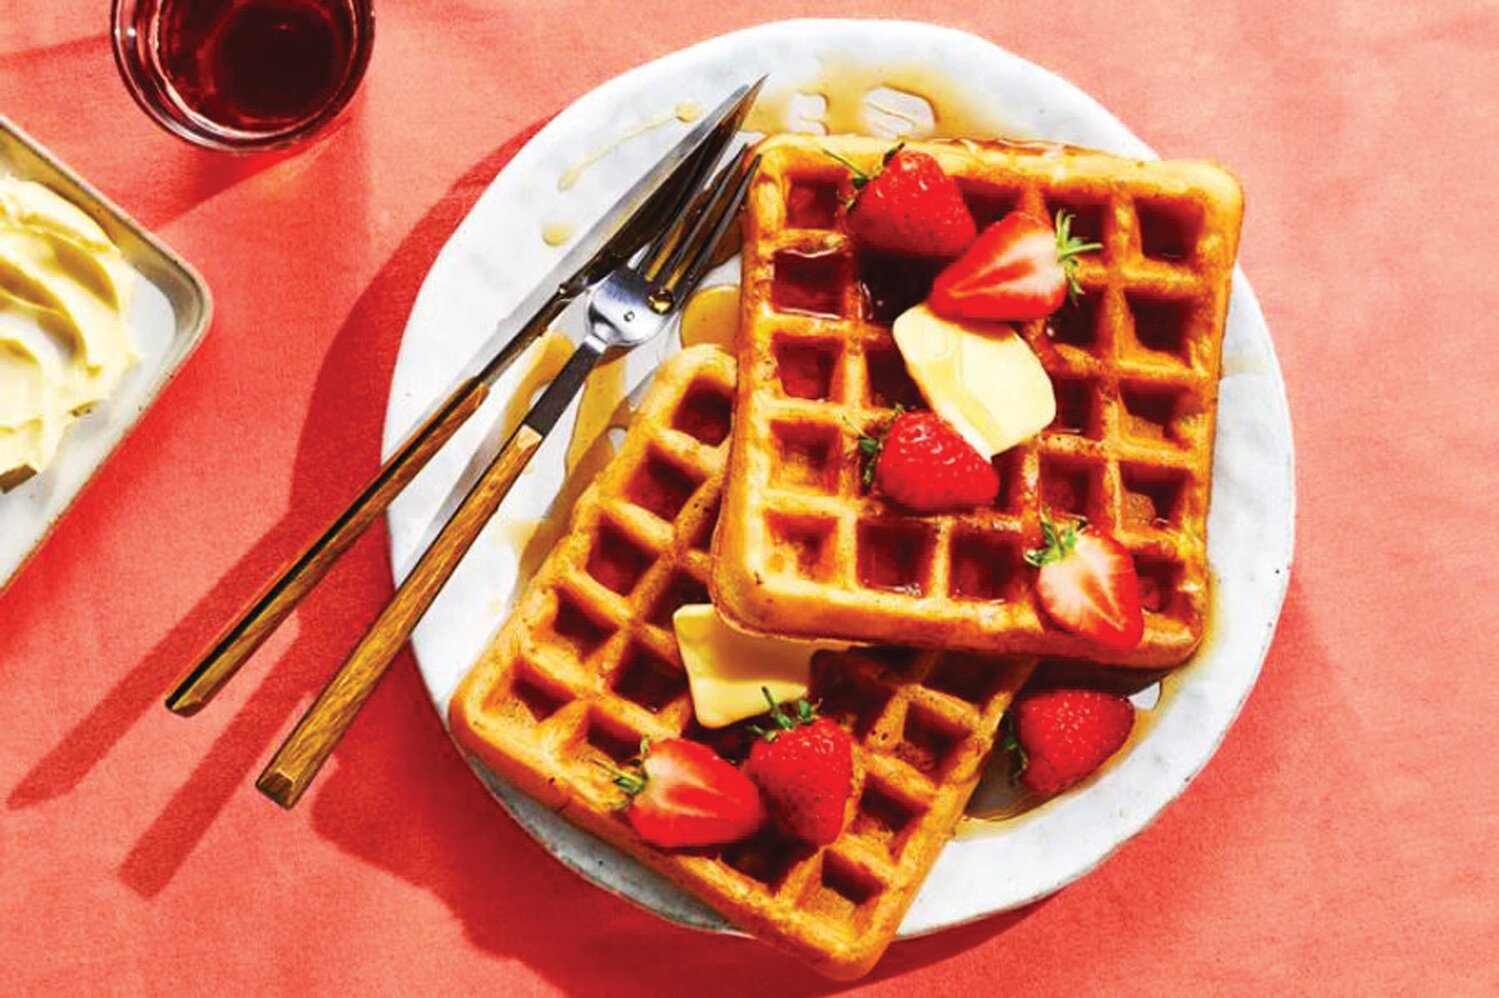 Each chef and home cook has their secrets to making the perfect light, crisp waffle.